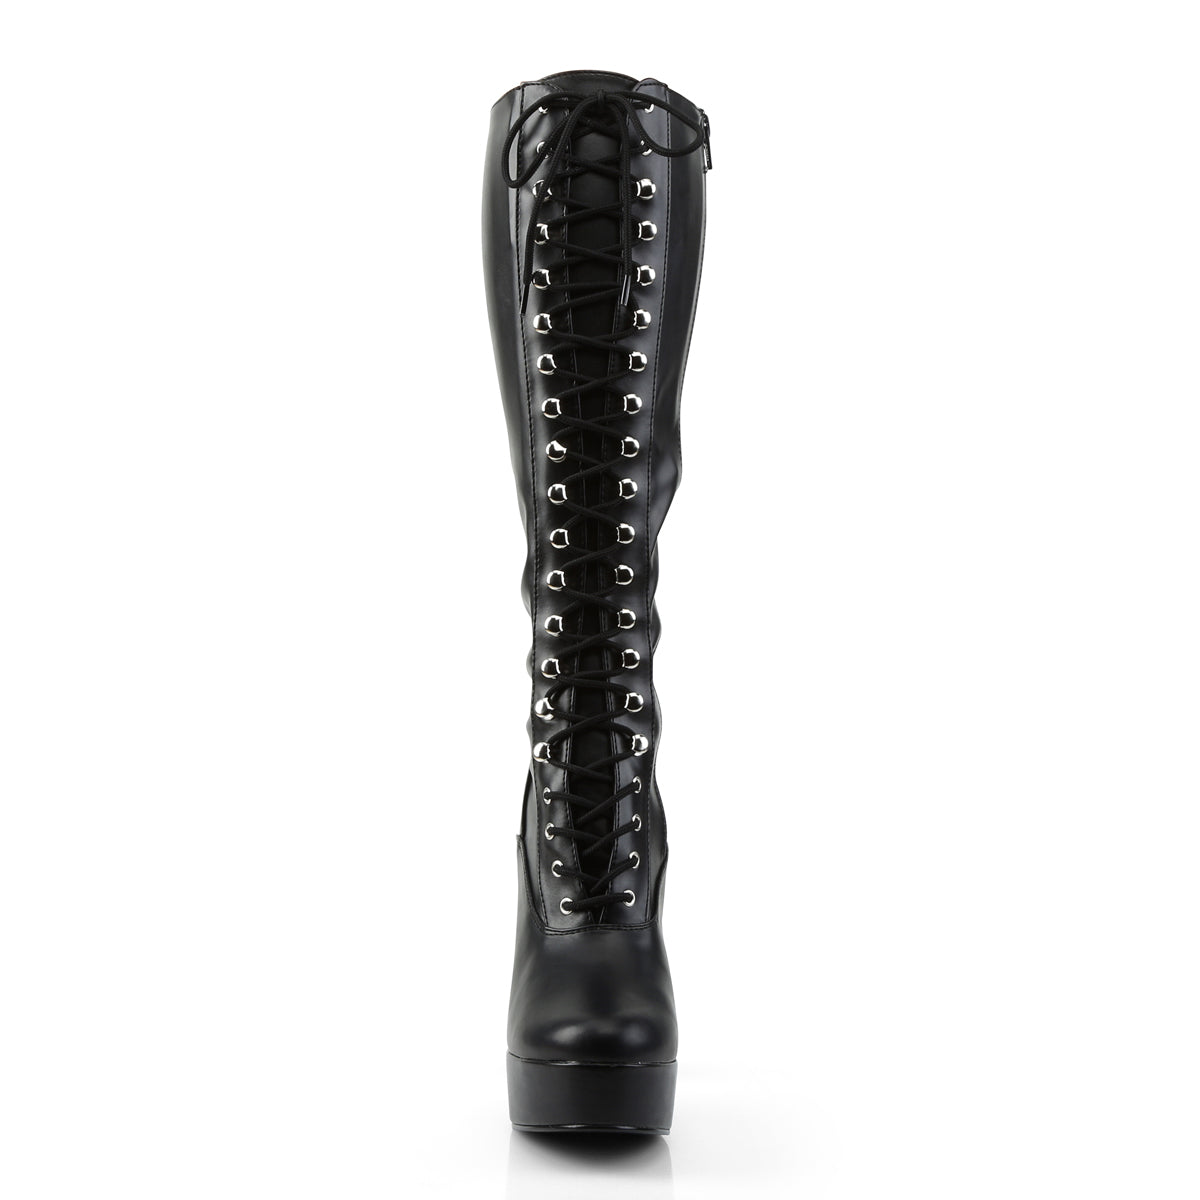 ELECTRA-2023 Black Stretch Faux Leather Knee Boot Pleaser